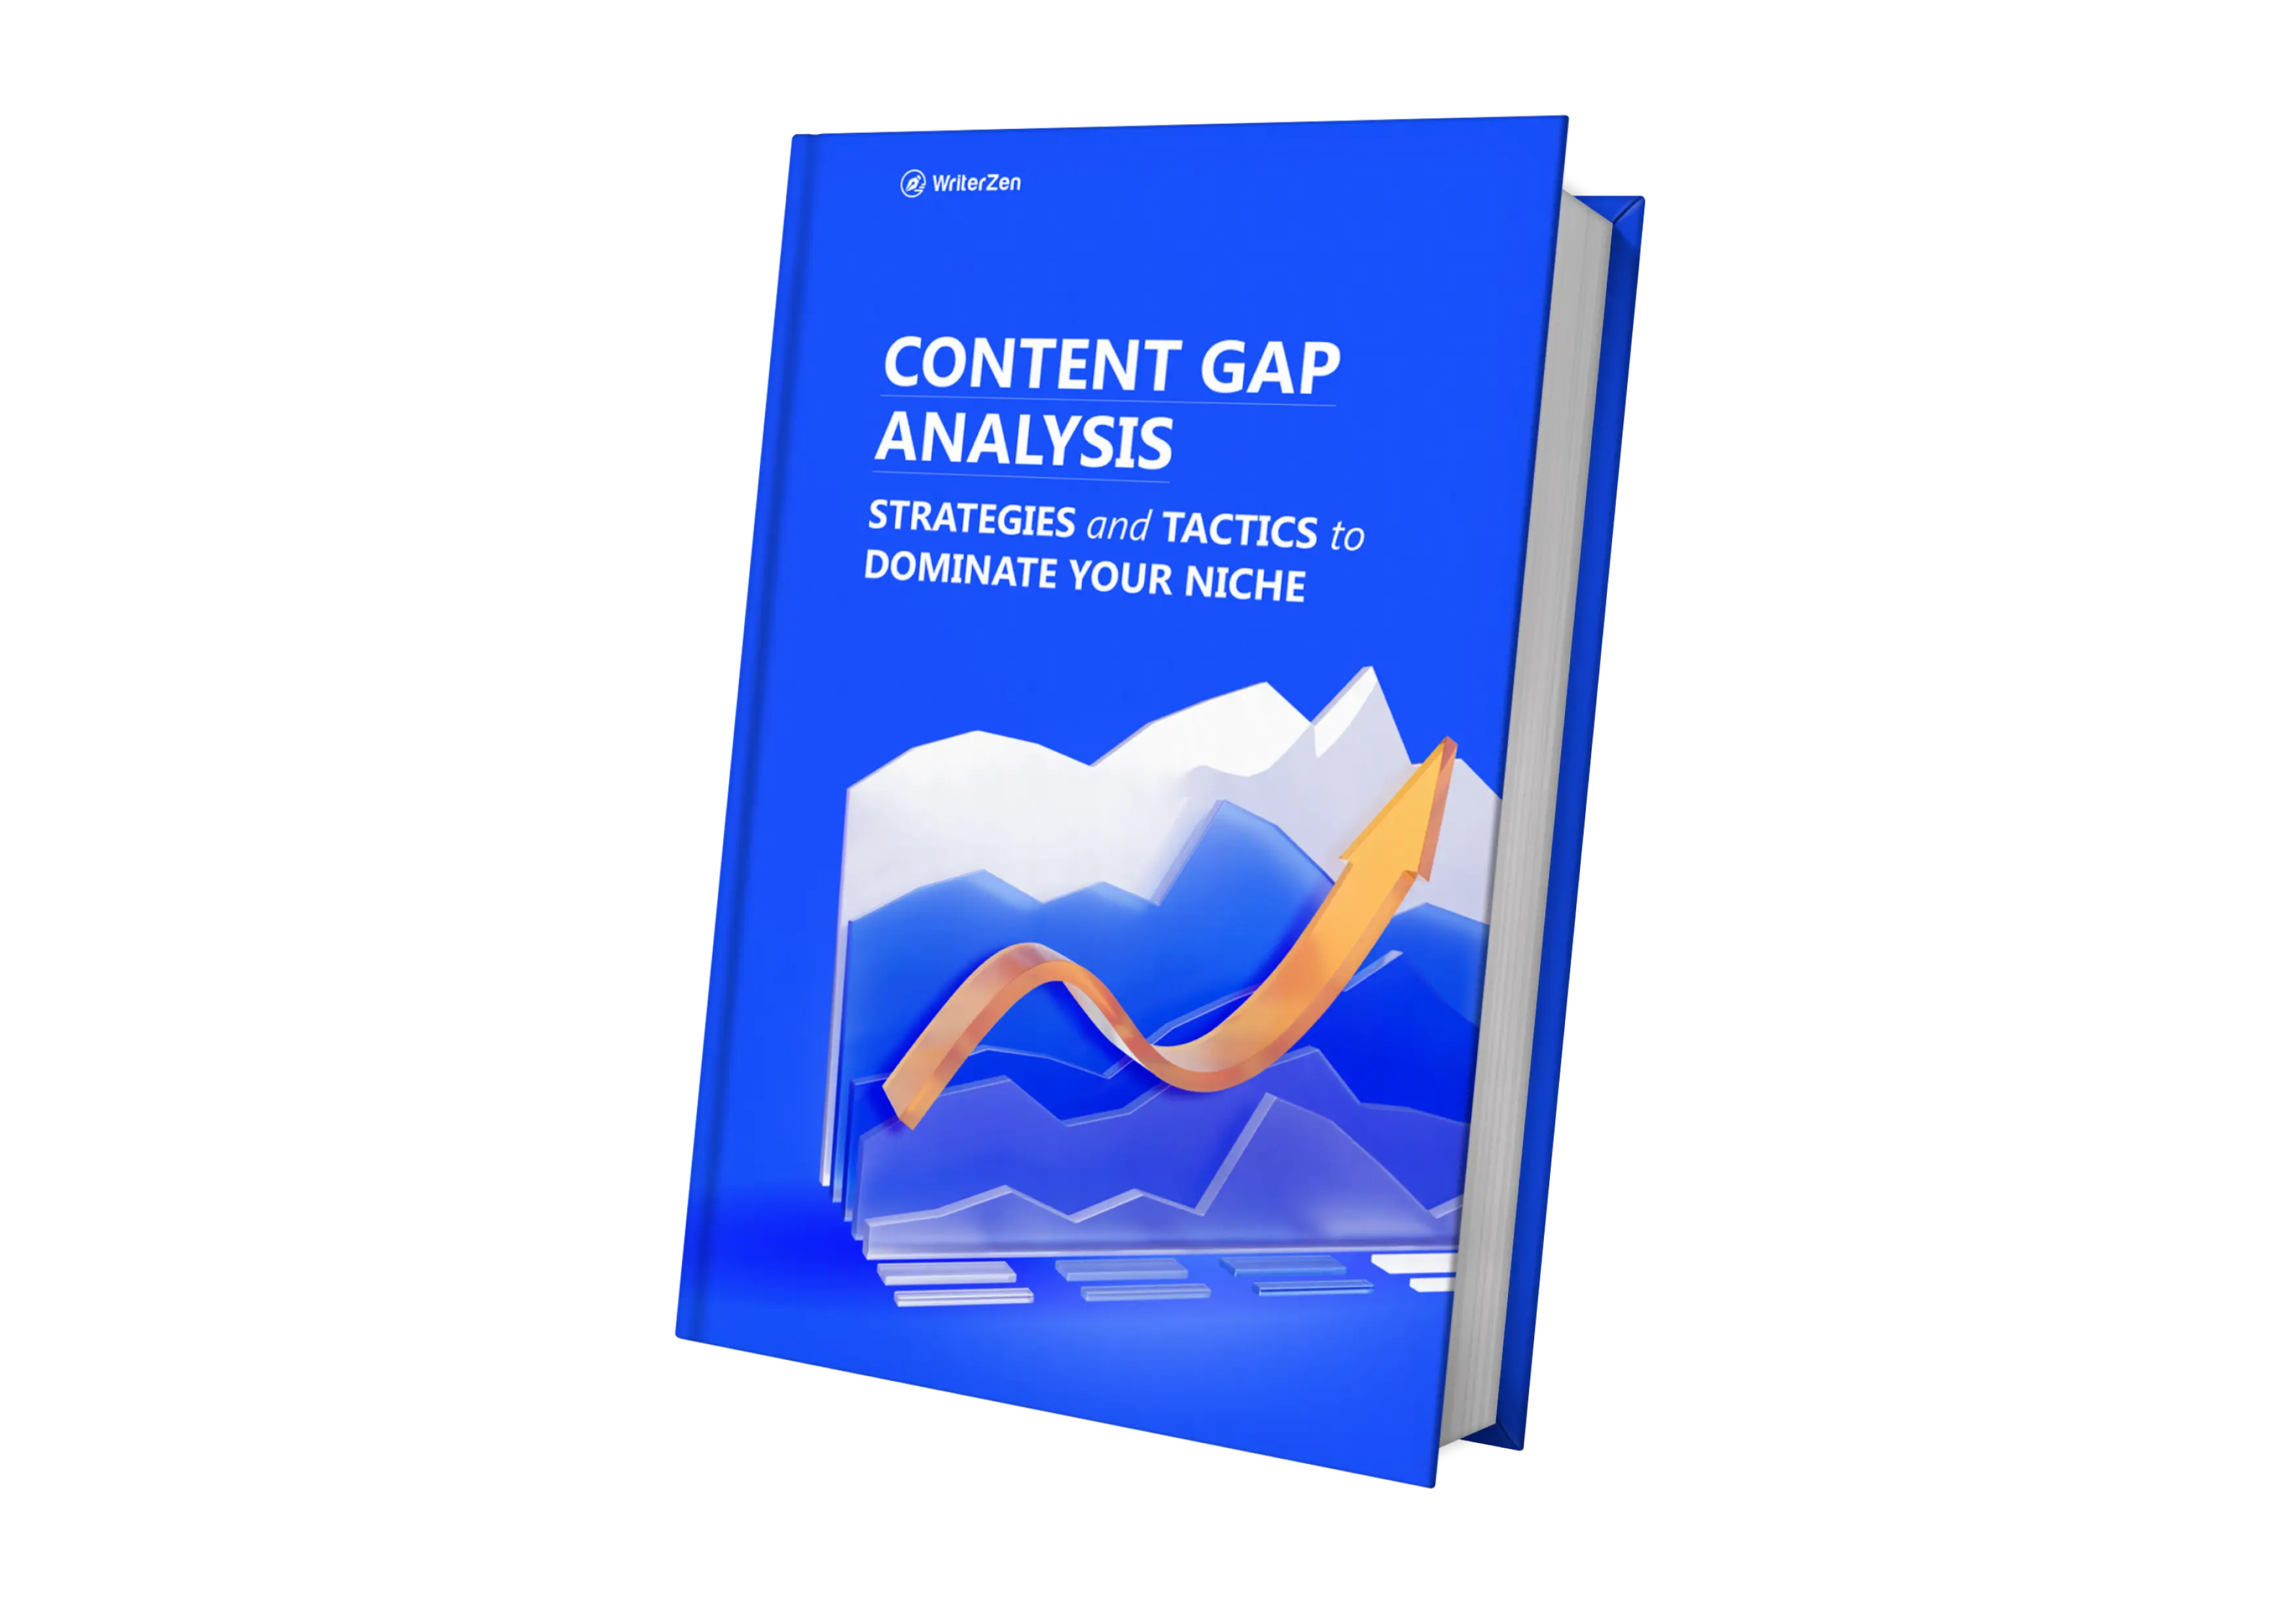 Content Gap Analysis: Strategies and Tactics to Dominate Your Niche